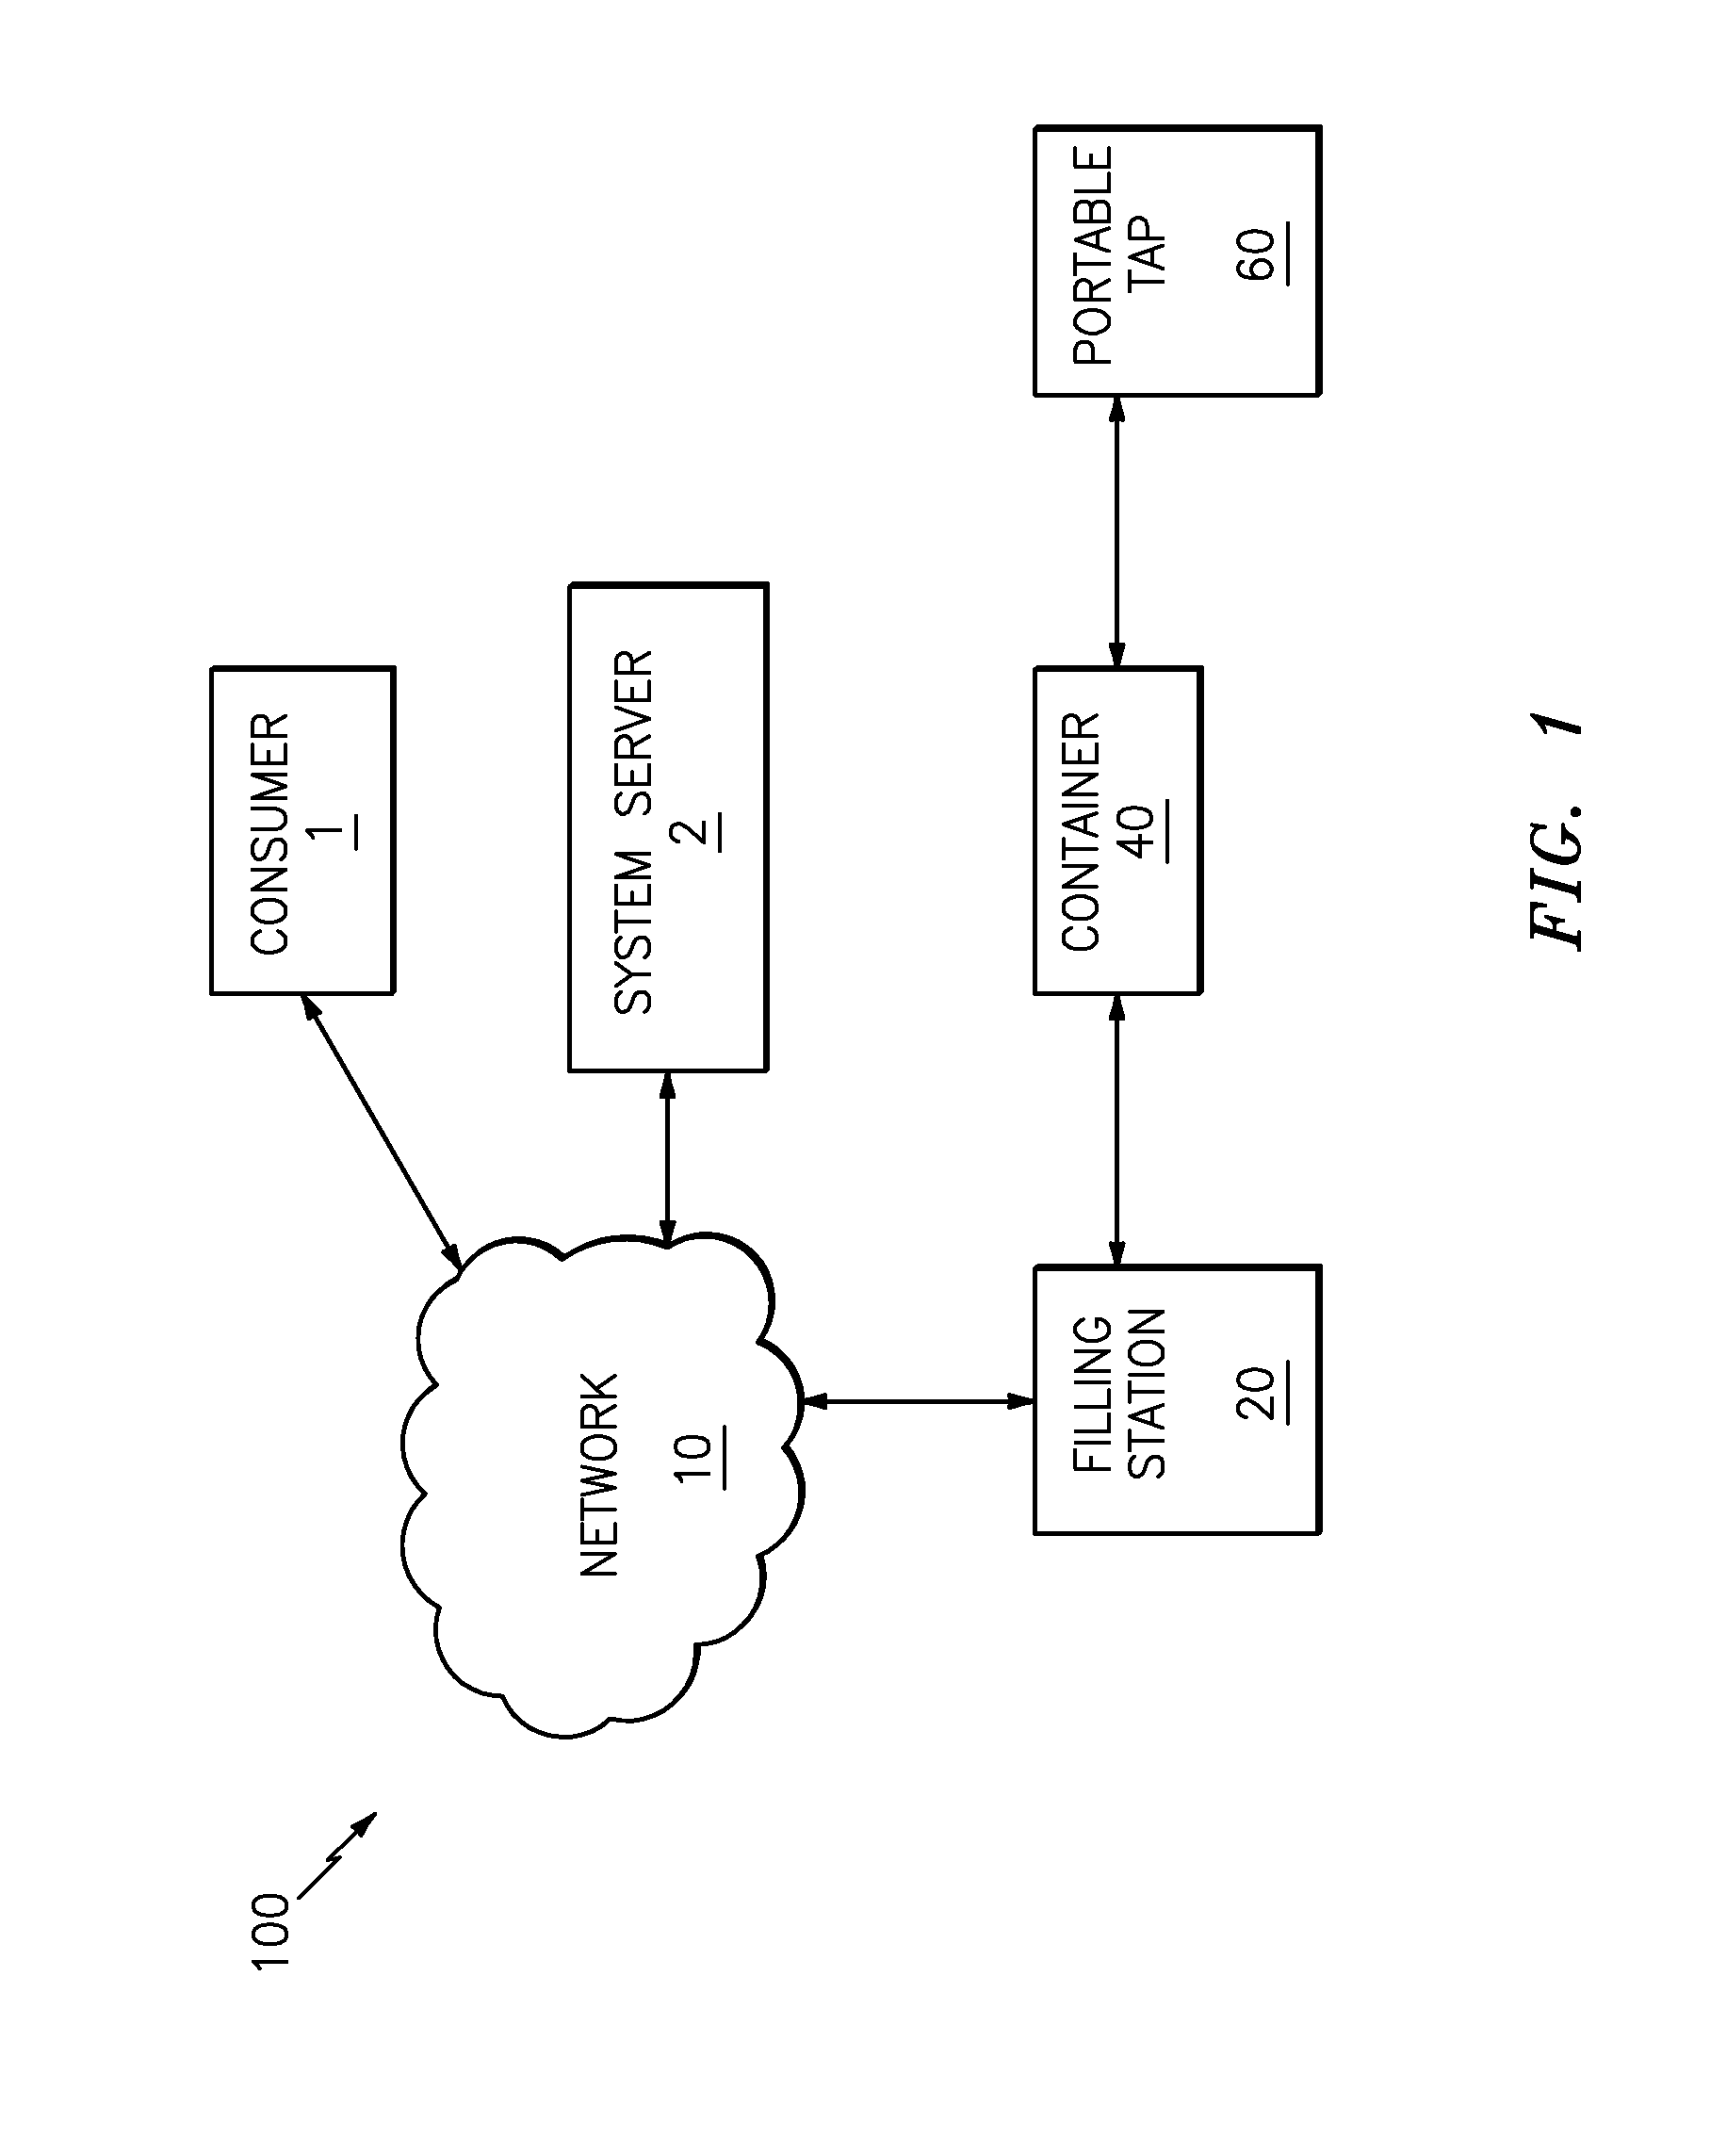 Self service controlled beverage dispensing system